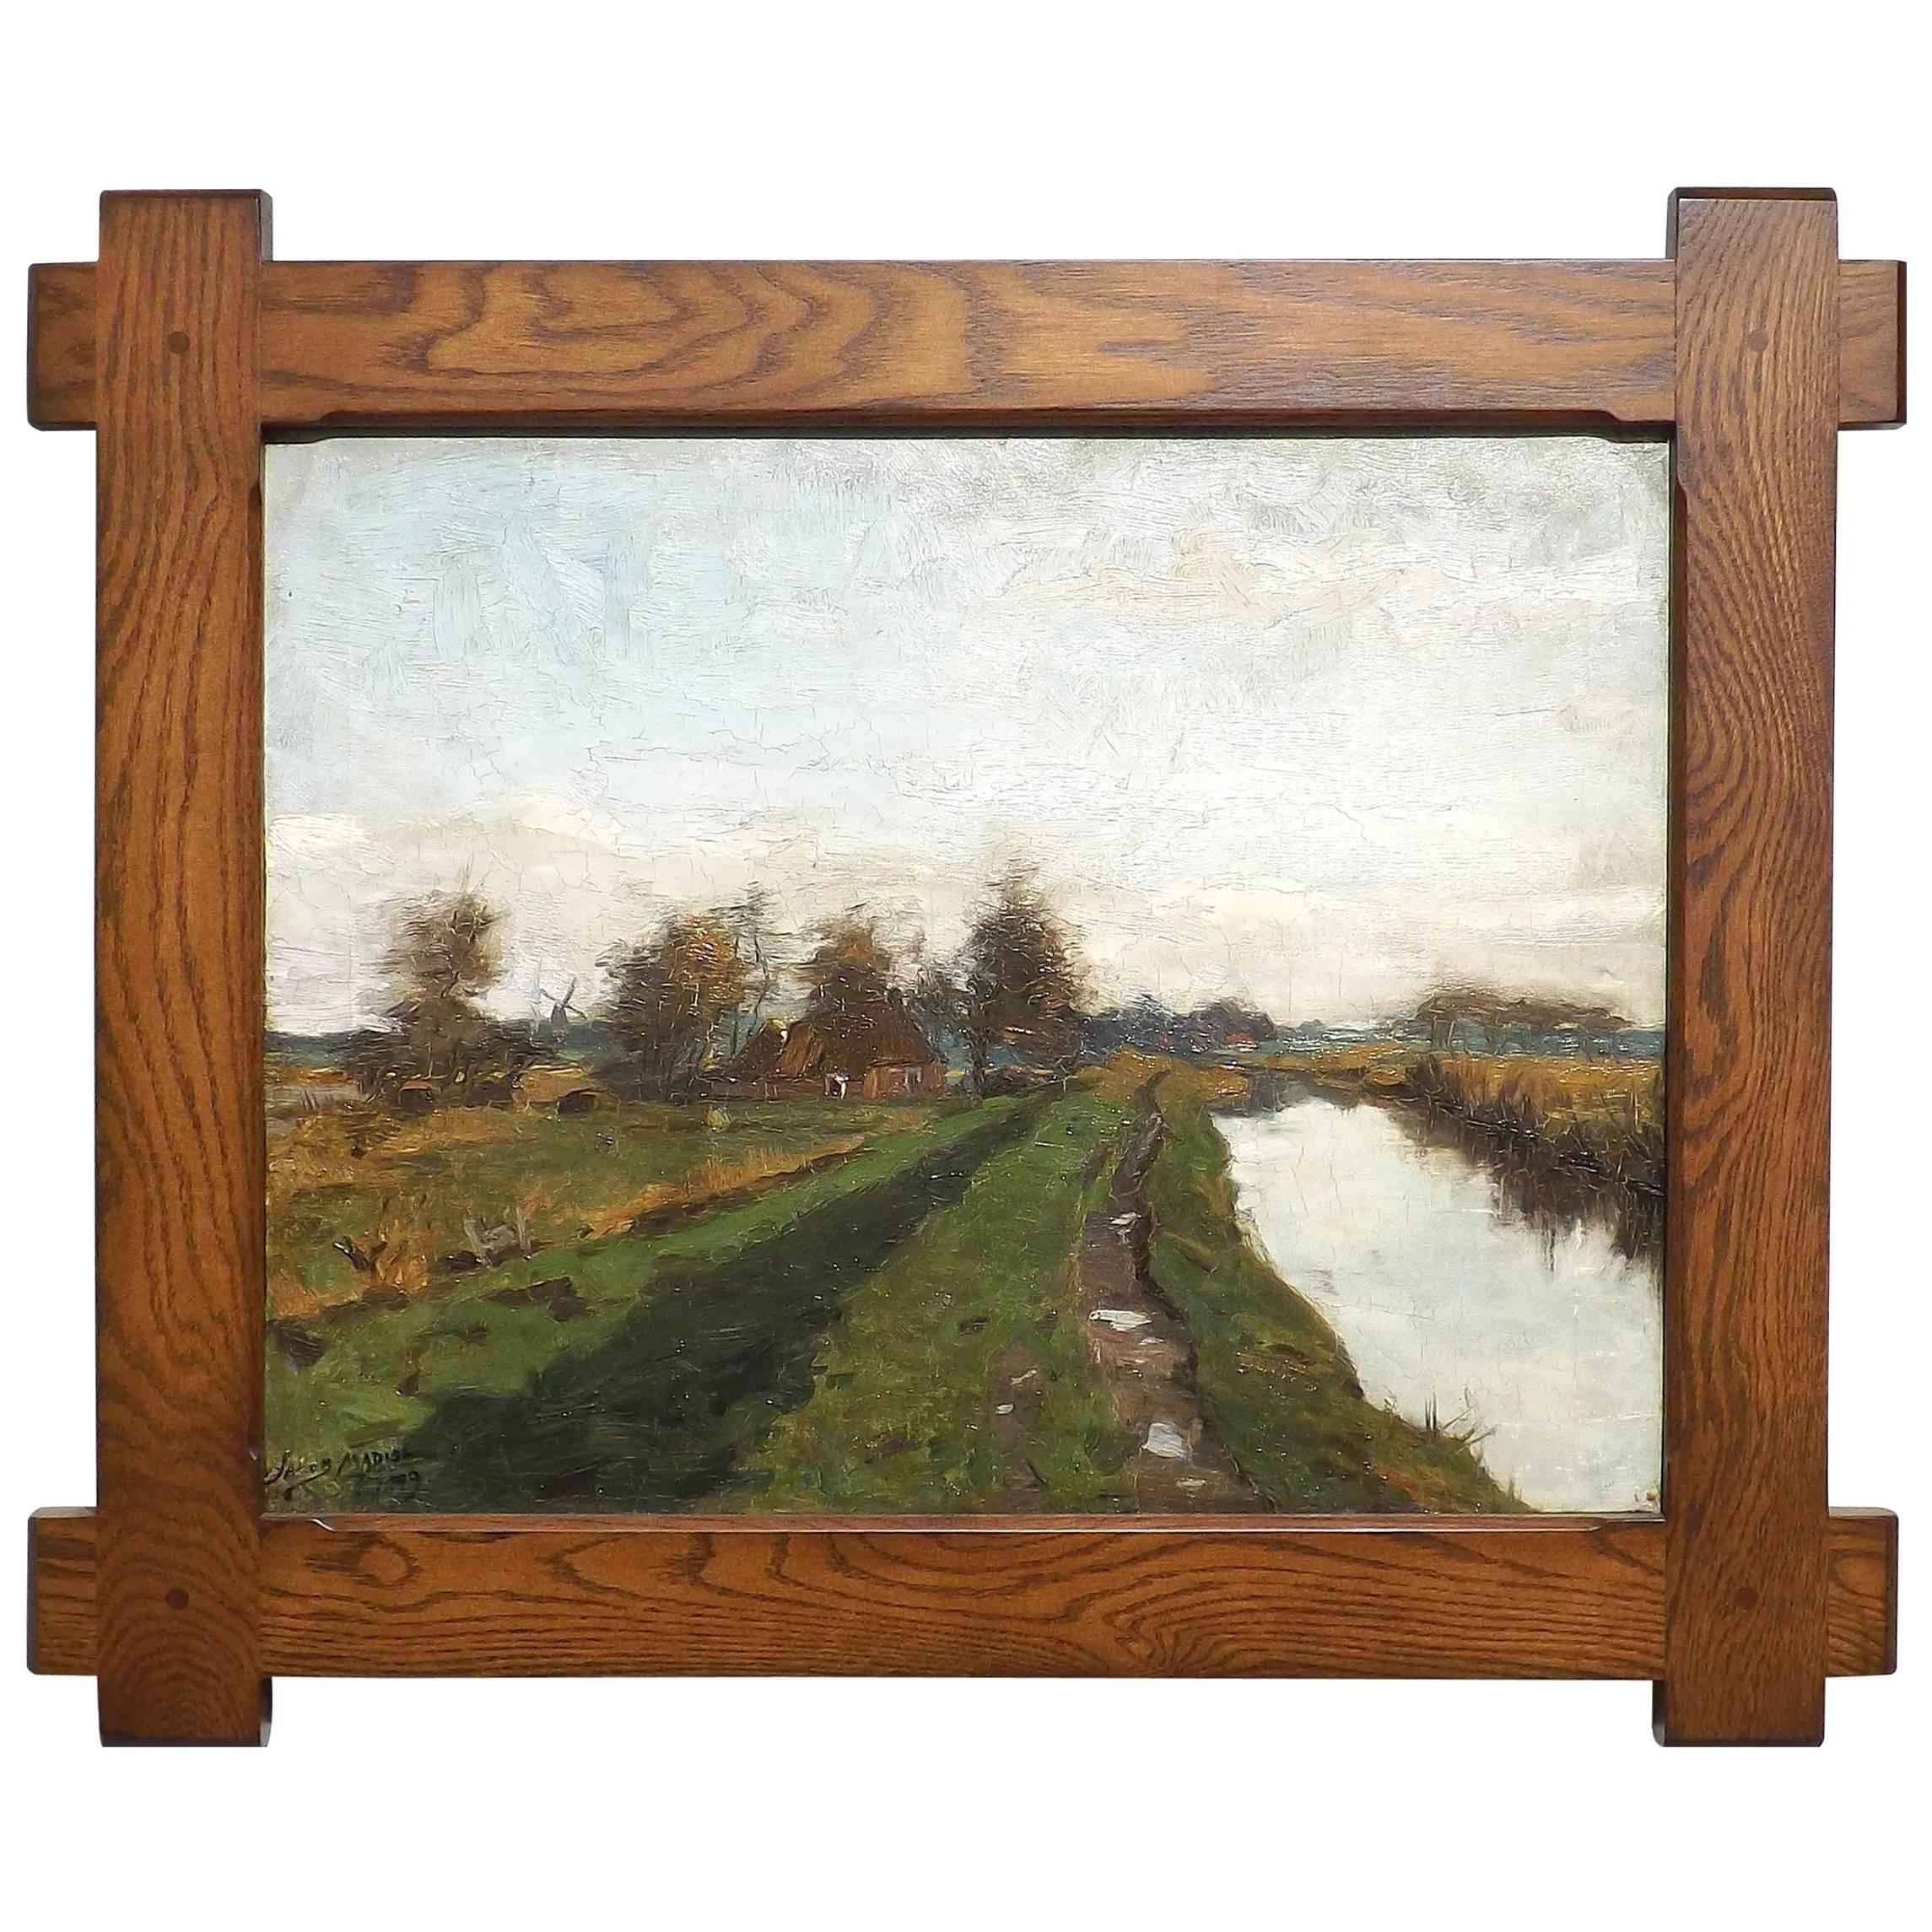 Landscape Painting of Paterswolde, the Netherlands by Jacob Madiol